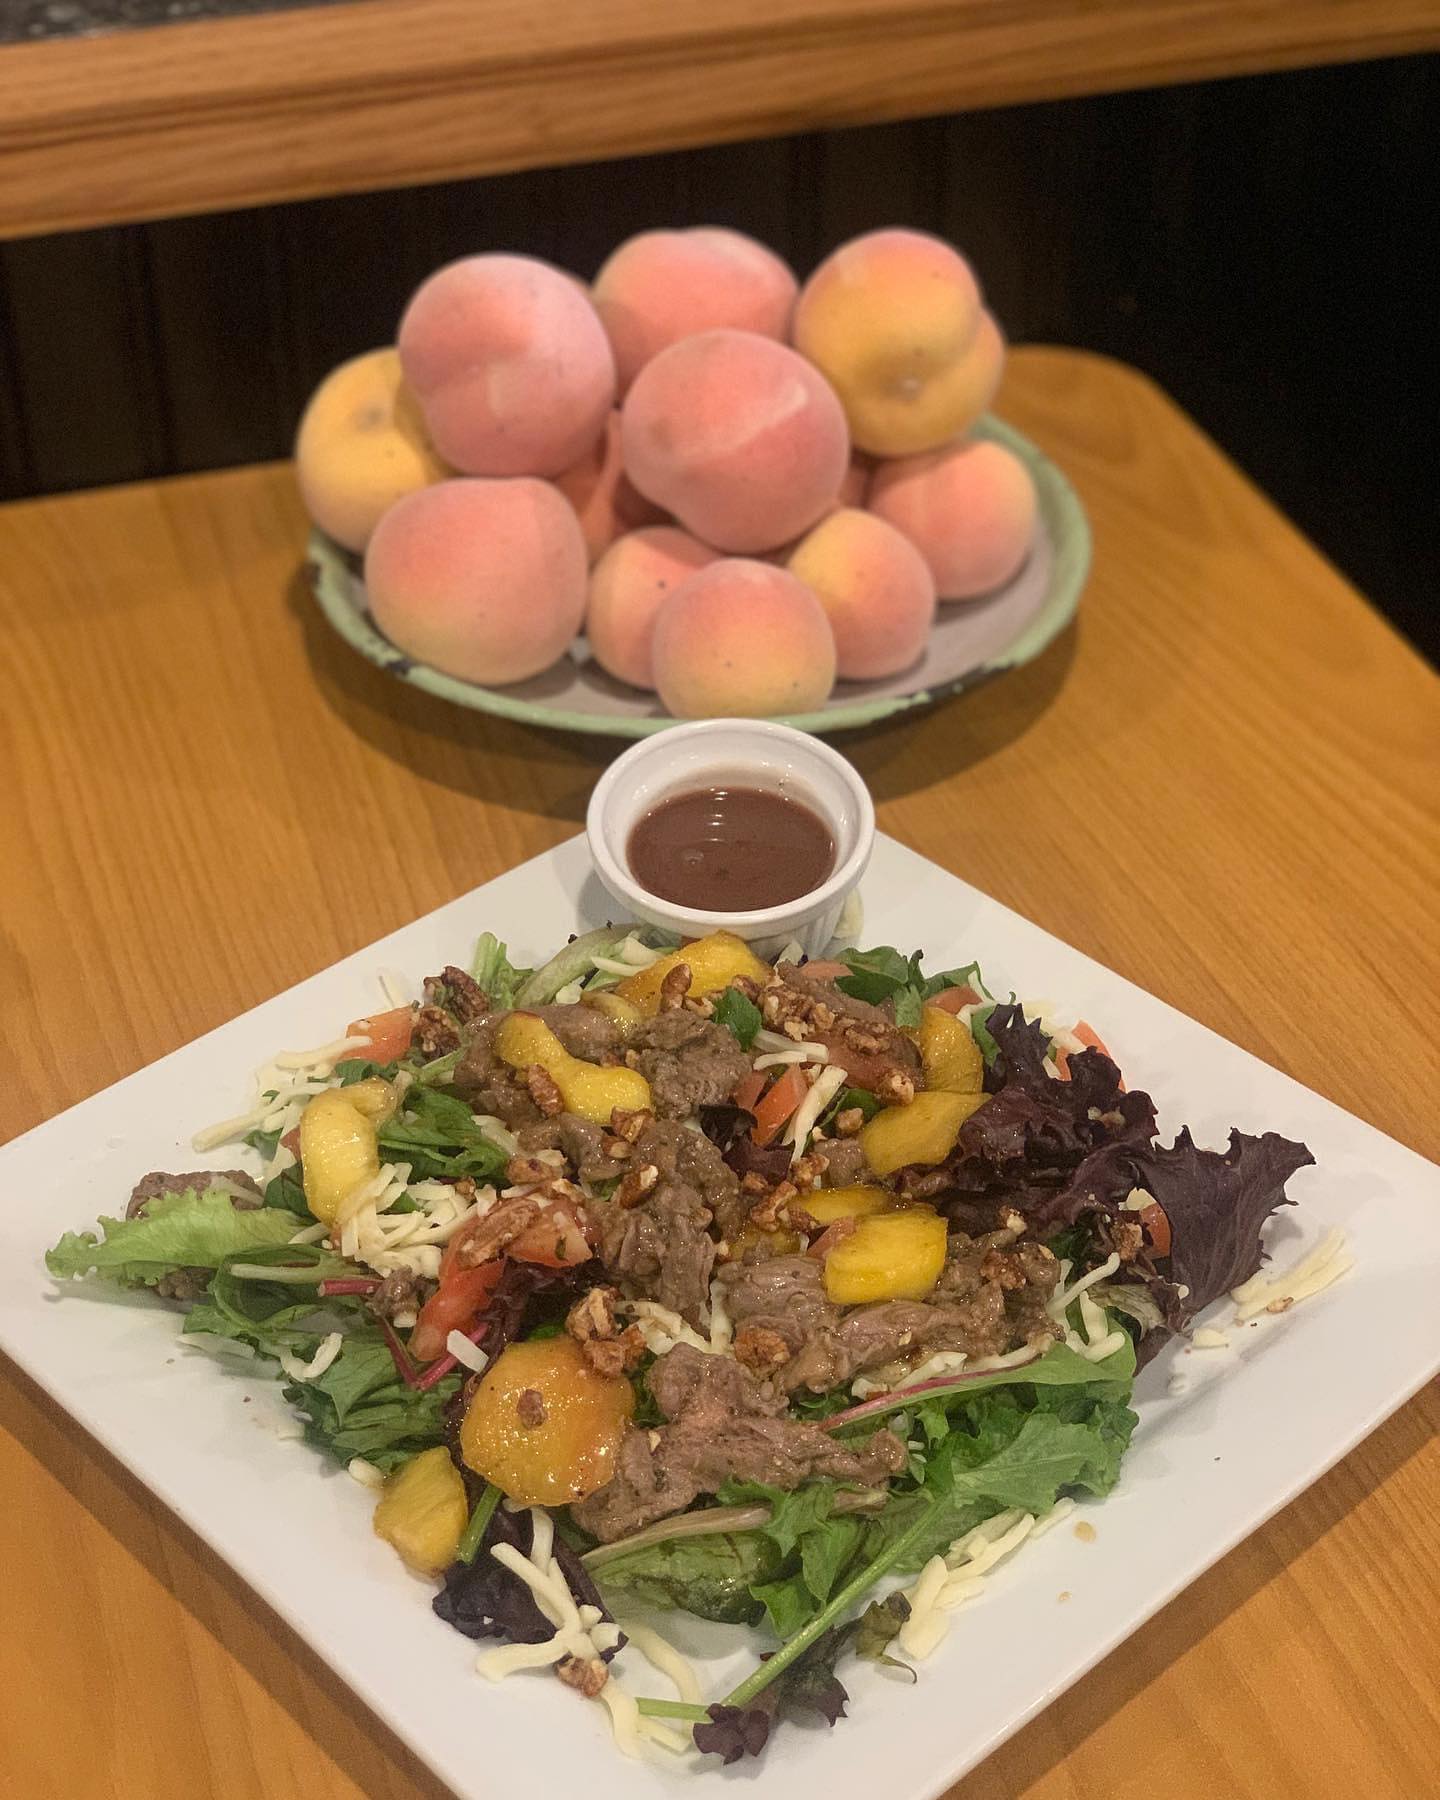 Tuesday specials:
Peach & steak salad
Soups: Loaded Potato & Tomato Bisque 
Sweets: Still tbd!!